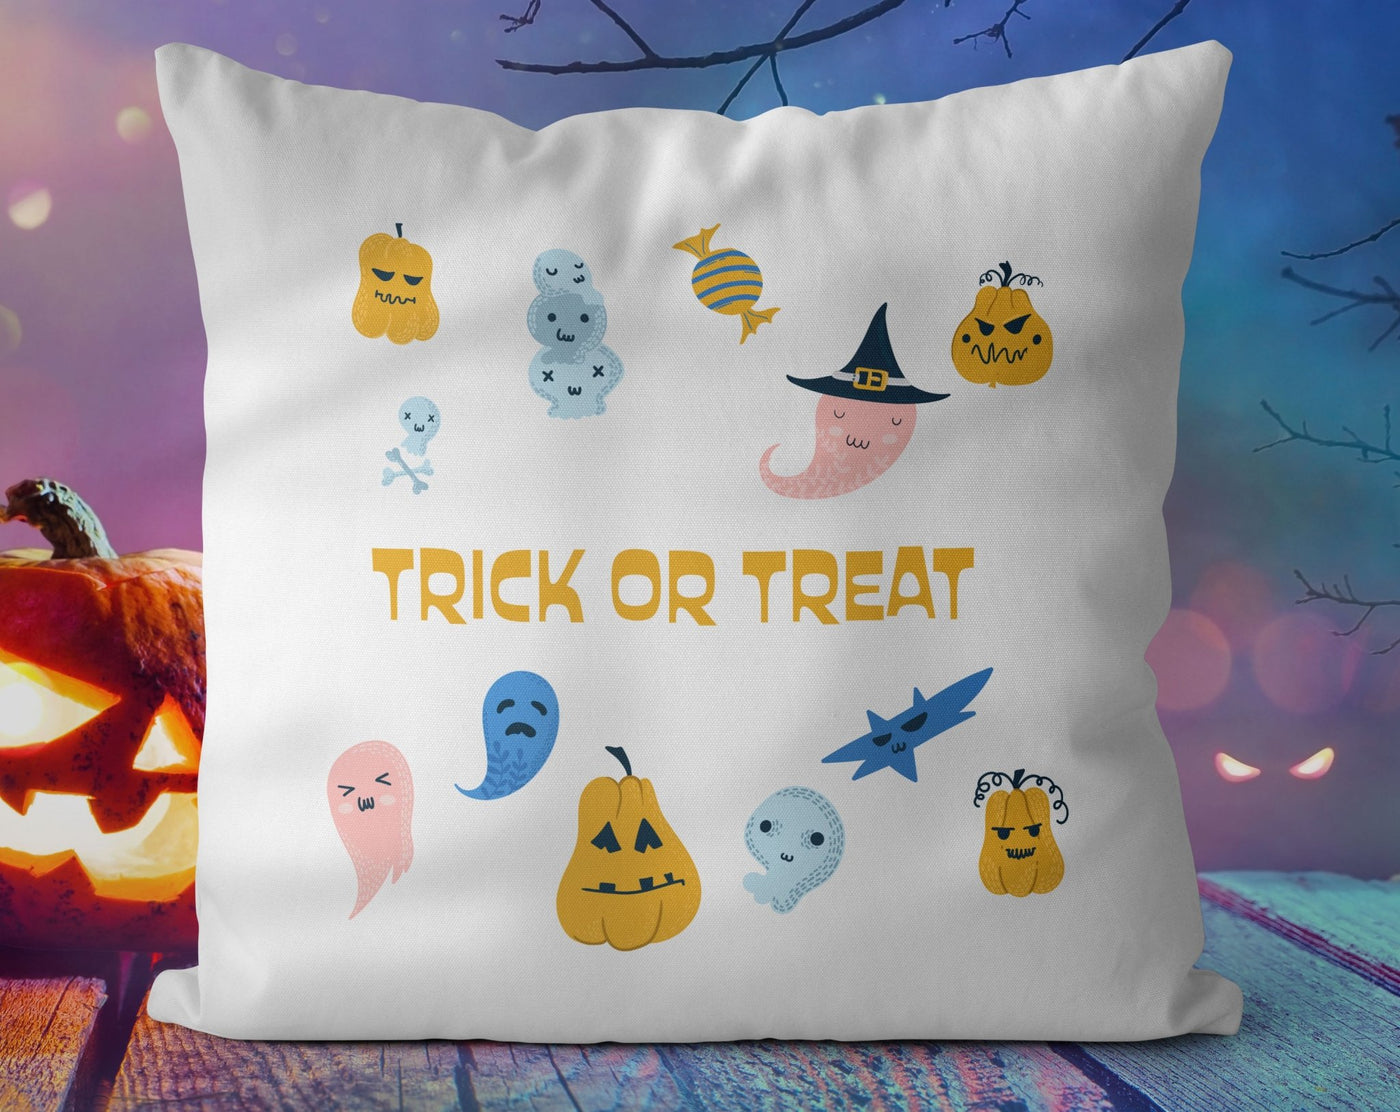 Halloween Ghosts and Jack O'lantern Trick or Treat Pillow Throw Cover with Insert - Cush Potato Pillows